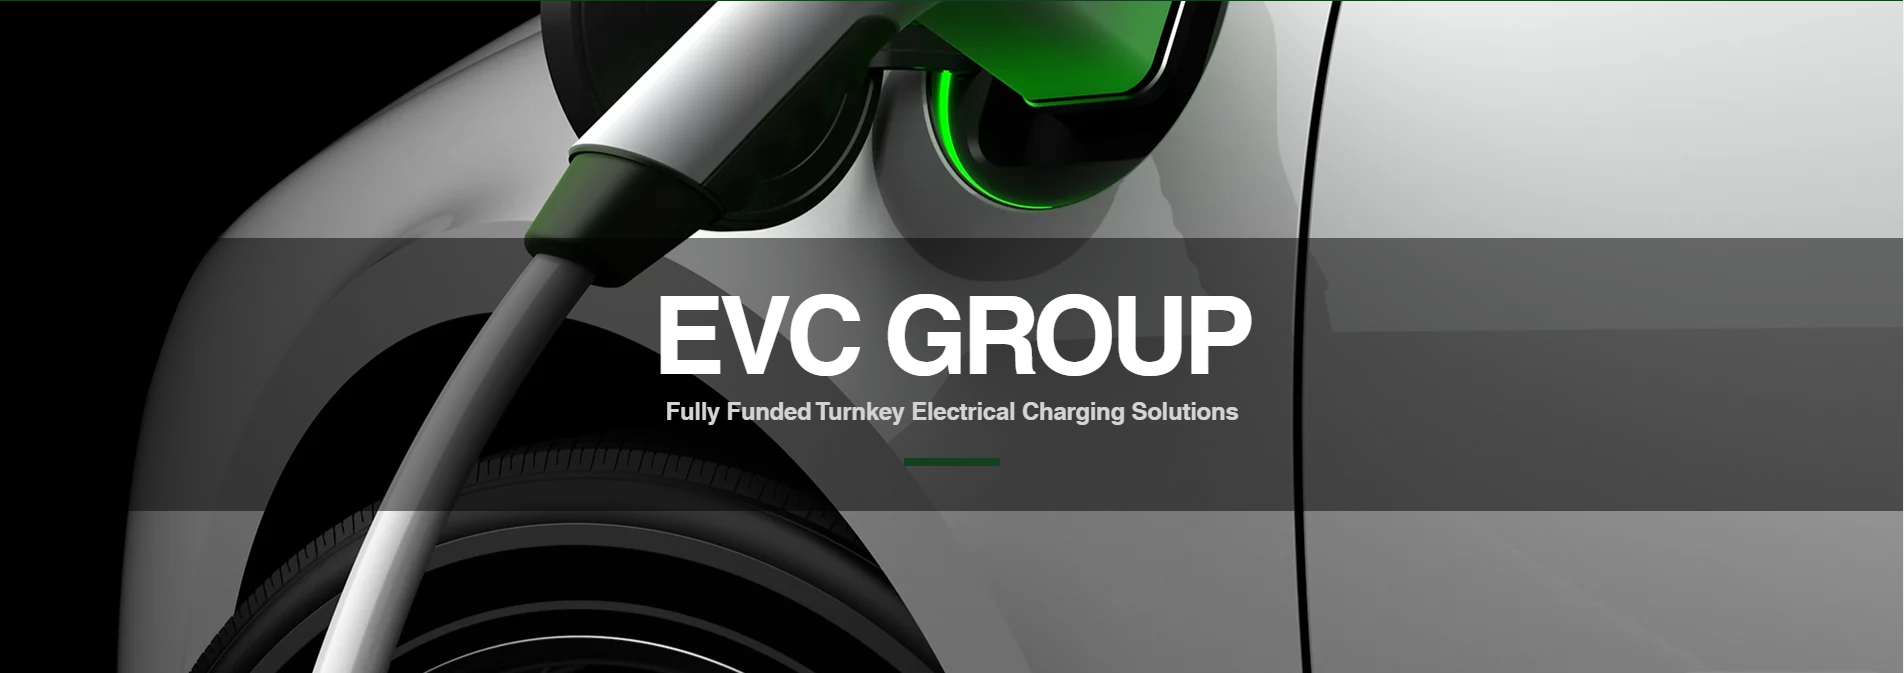 EVC Group - electric vehicle charging